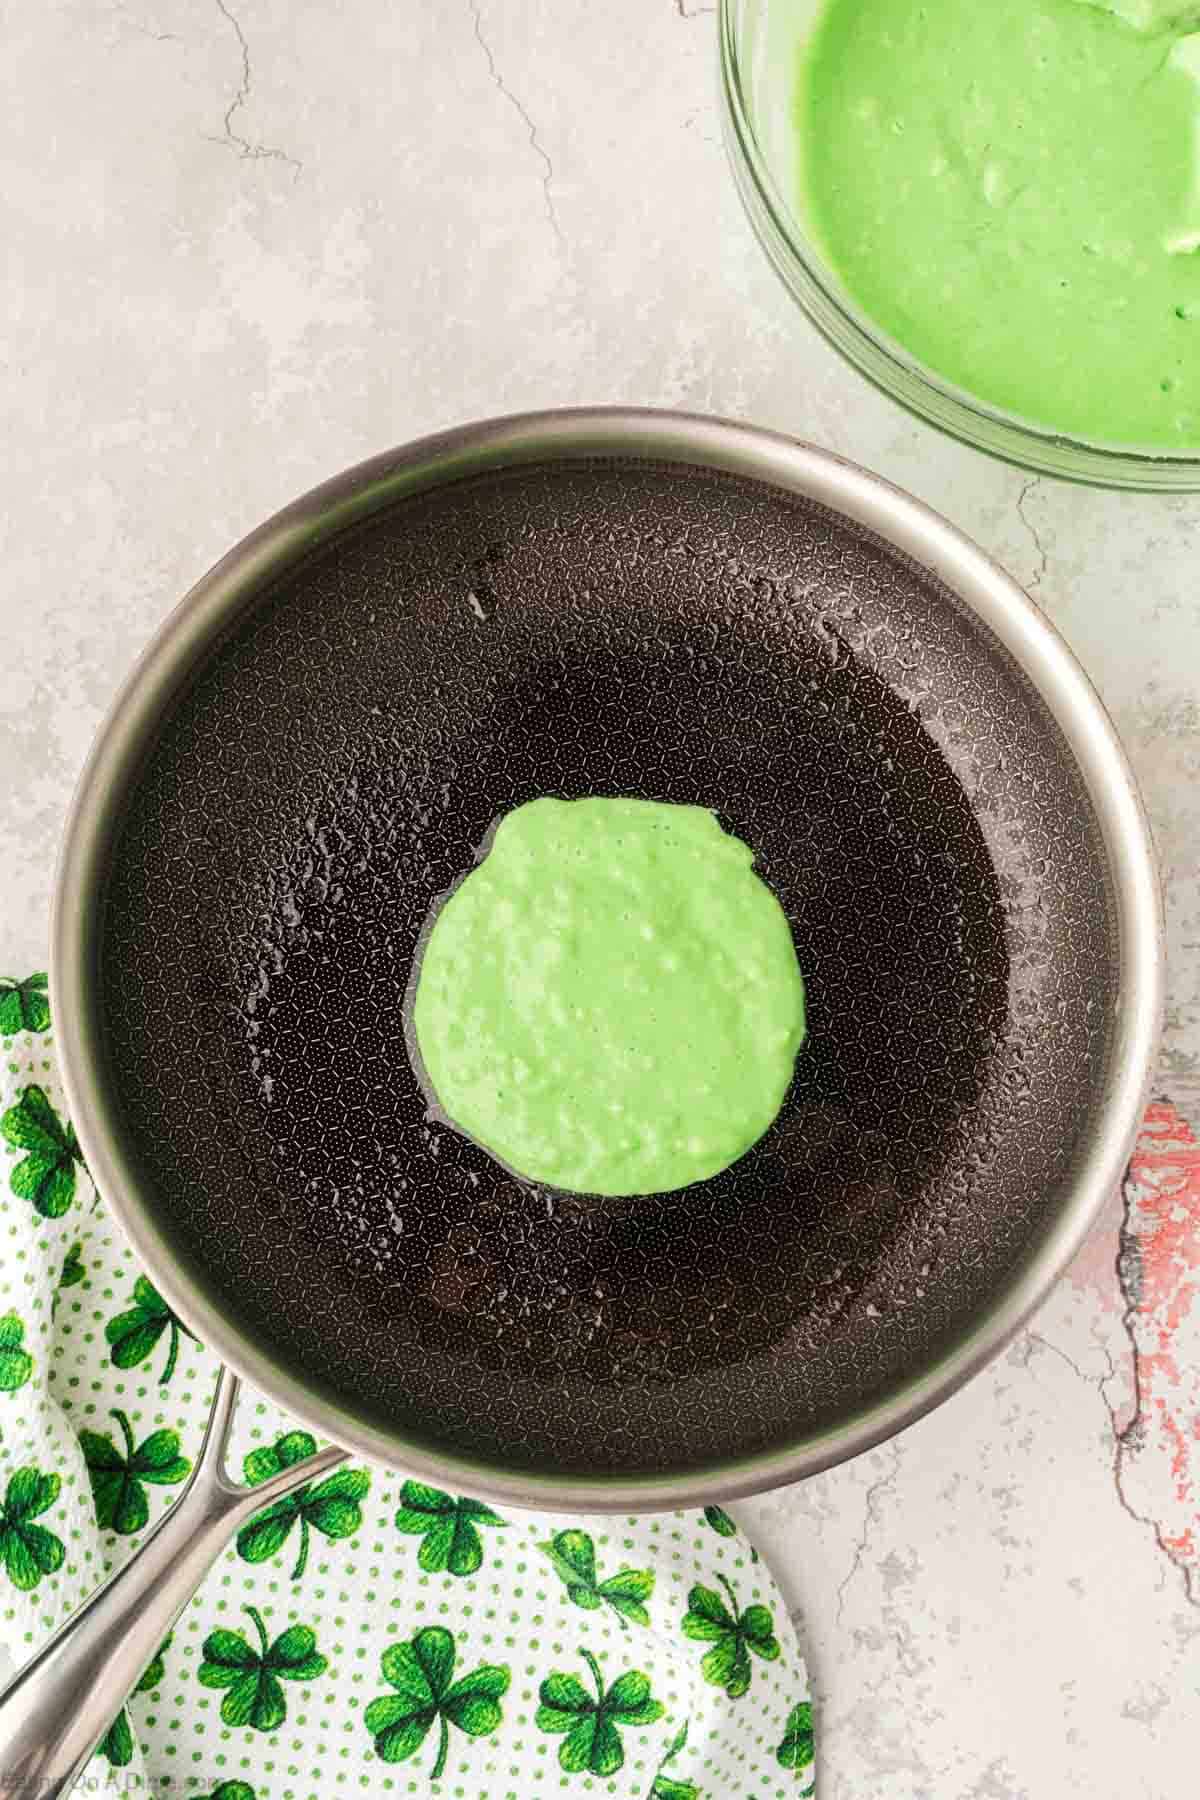 Pouring green batter in the skillet